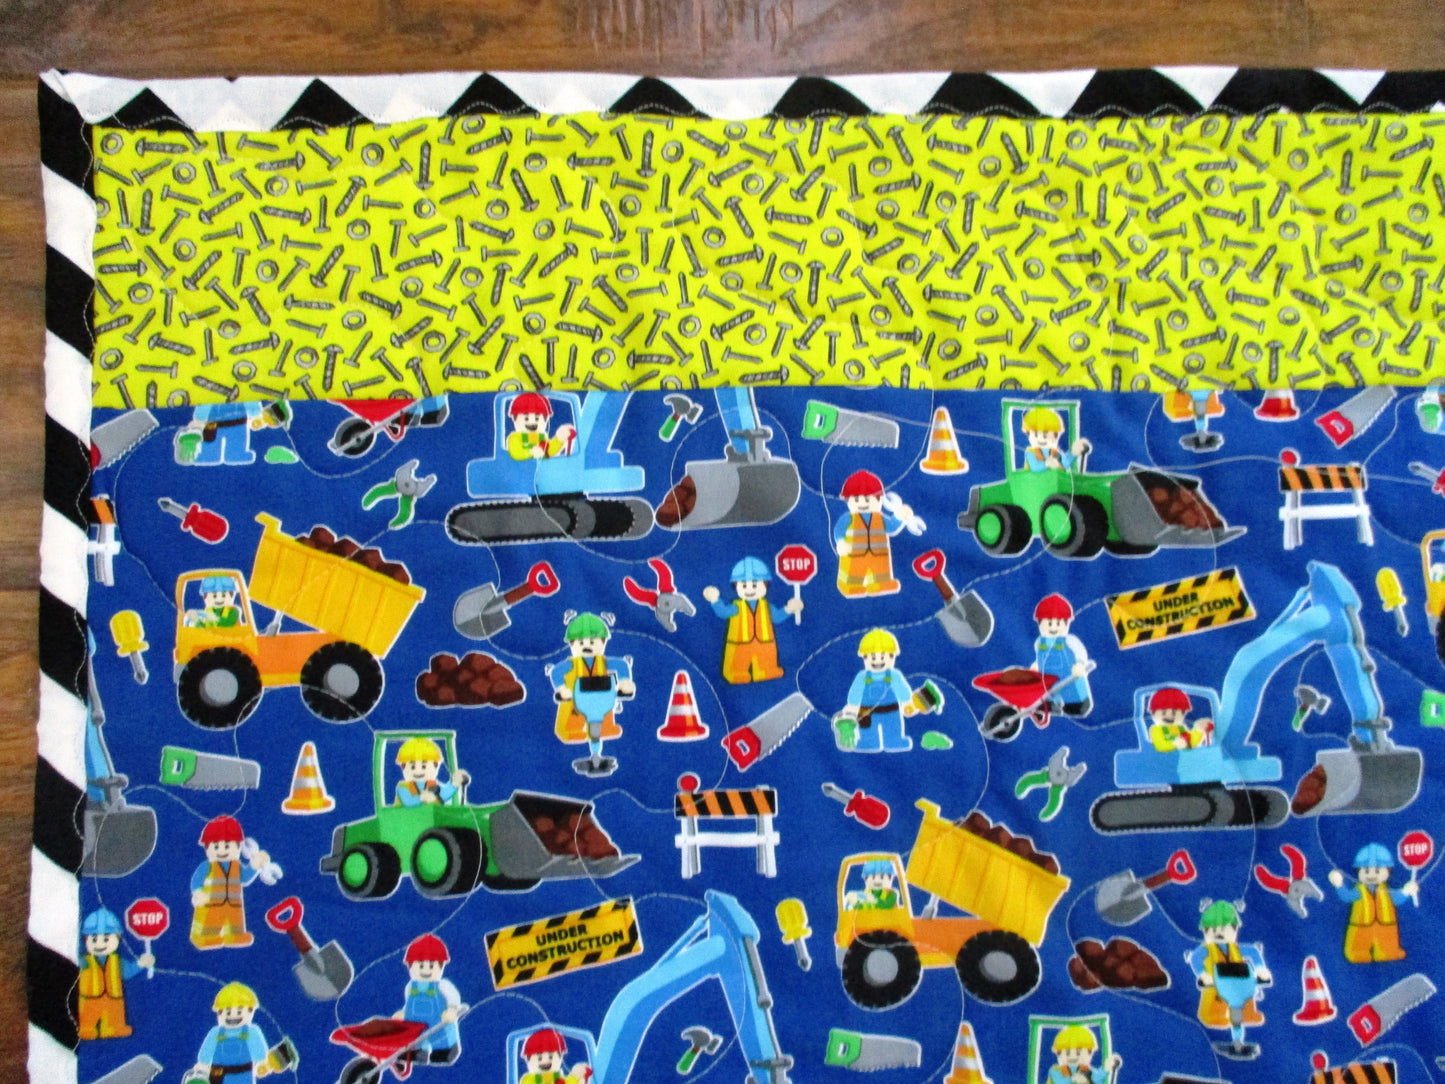 Boys Lego Construction Site Quilted Crib Toddler Blanket